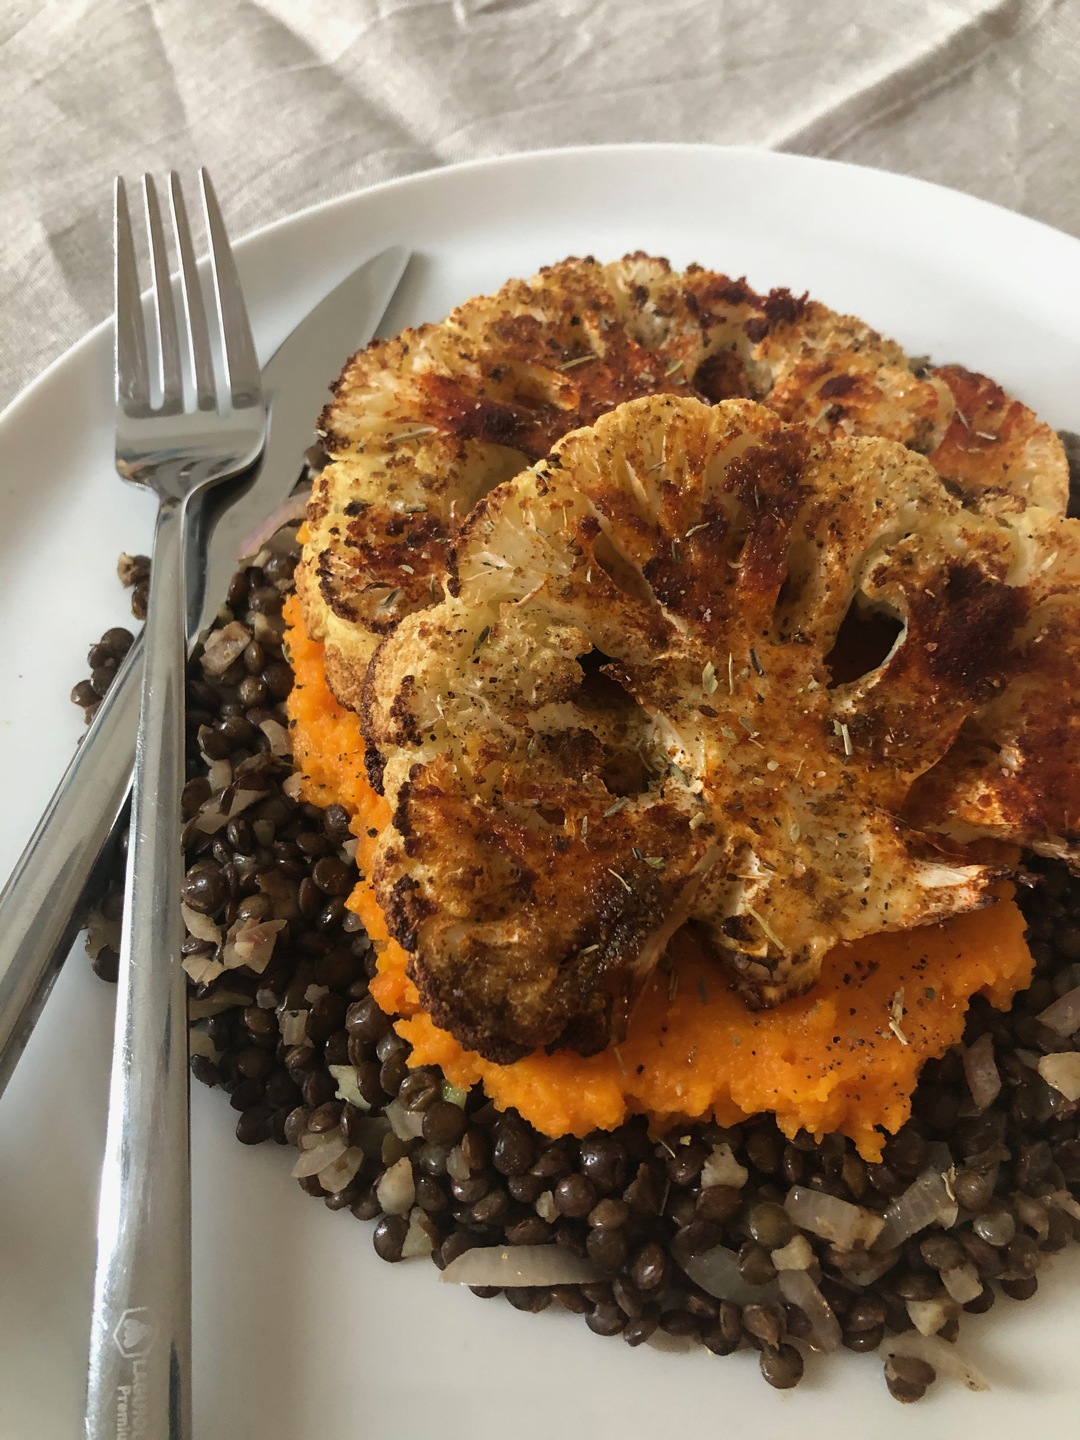 Cauliflower steak with carrots and lentils